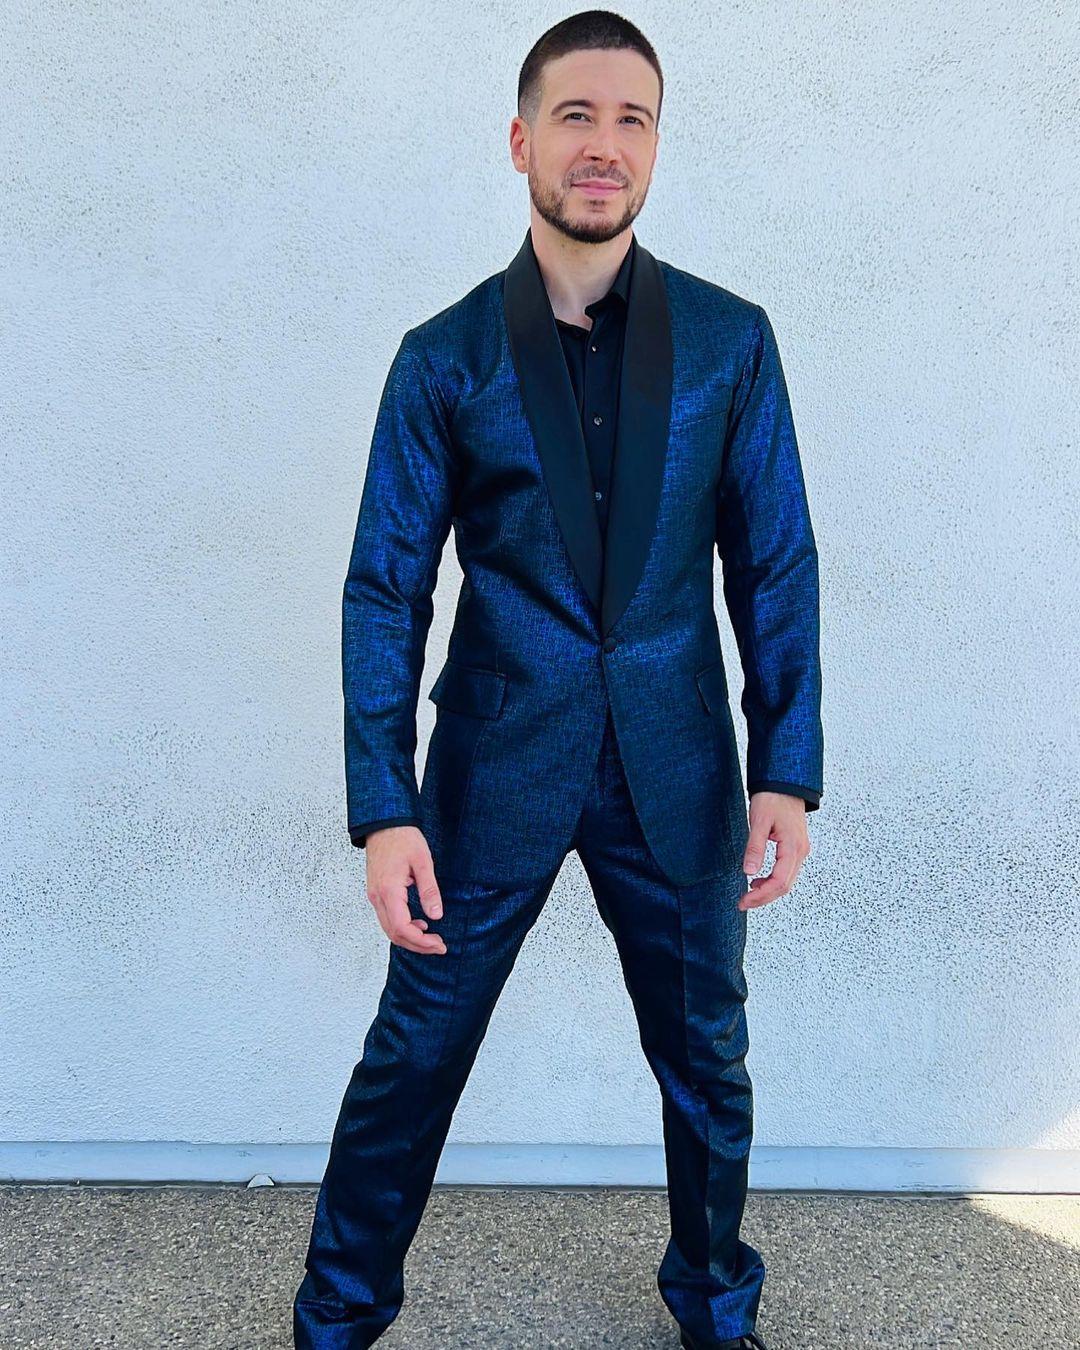 Vinny Guadagnino on Dancing With the Stars